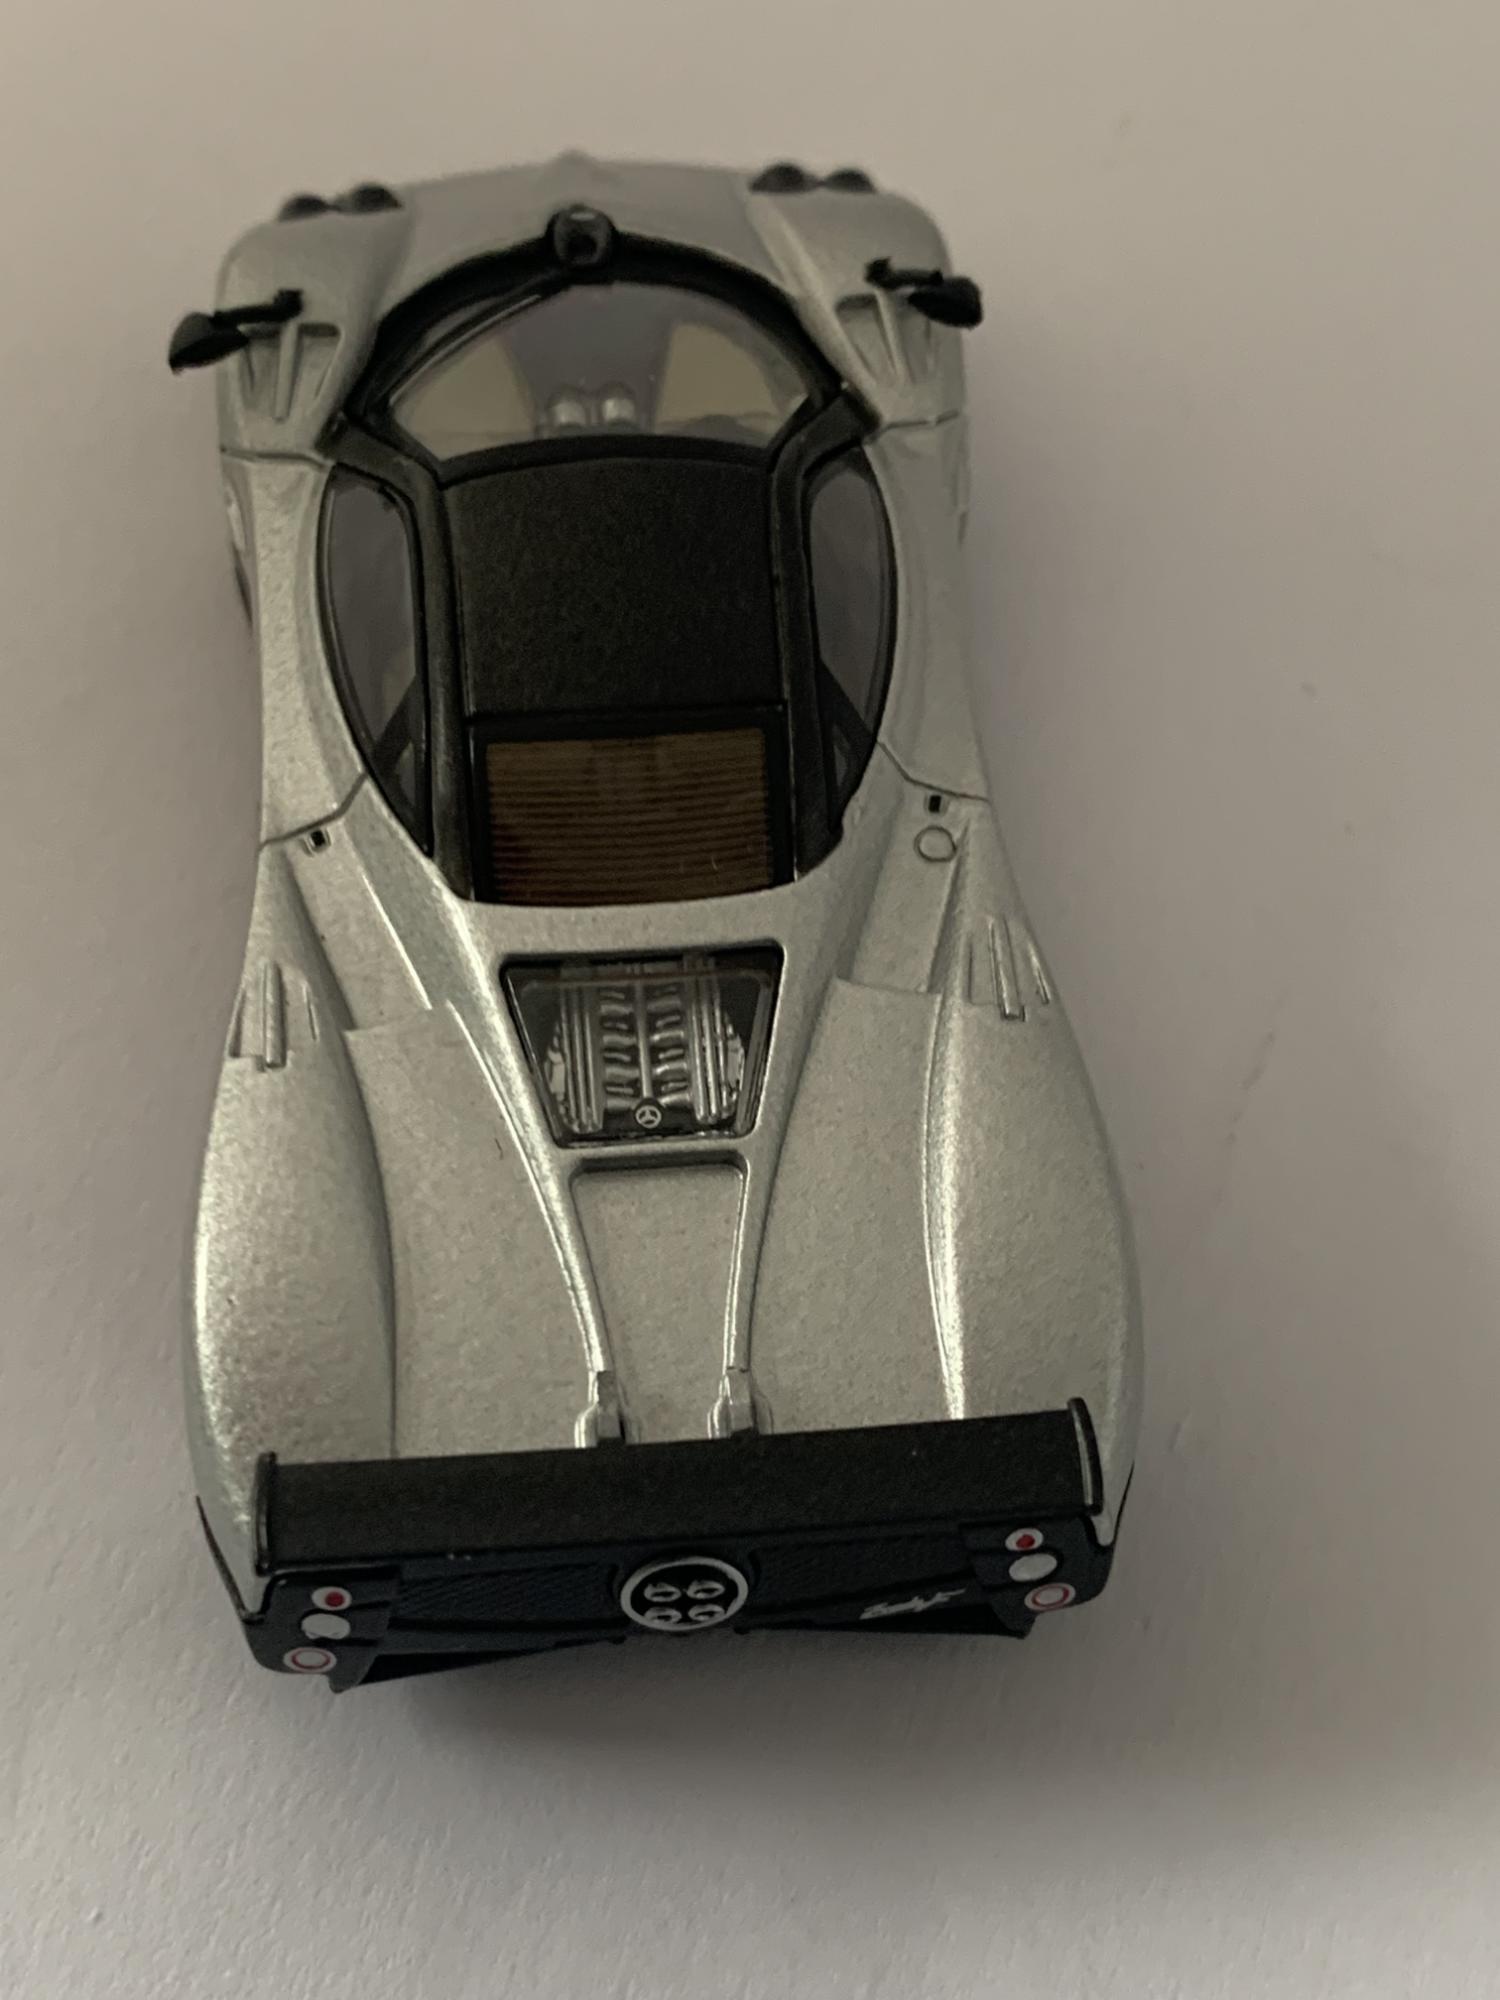 A good reproduction of the Pagani Zonda F  with detail throughout, all authentically recreated. The model is presented in a box, the car is approx. 7 cm long and the box is 10 cm long